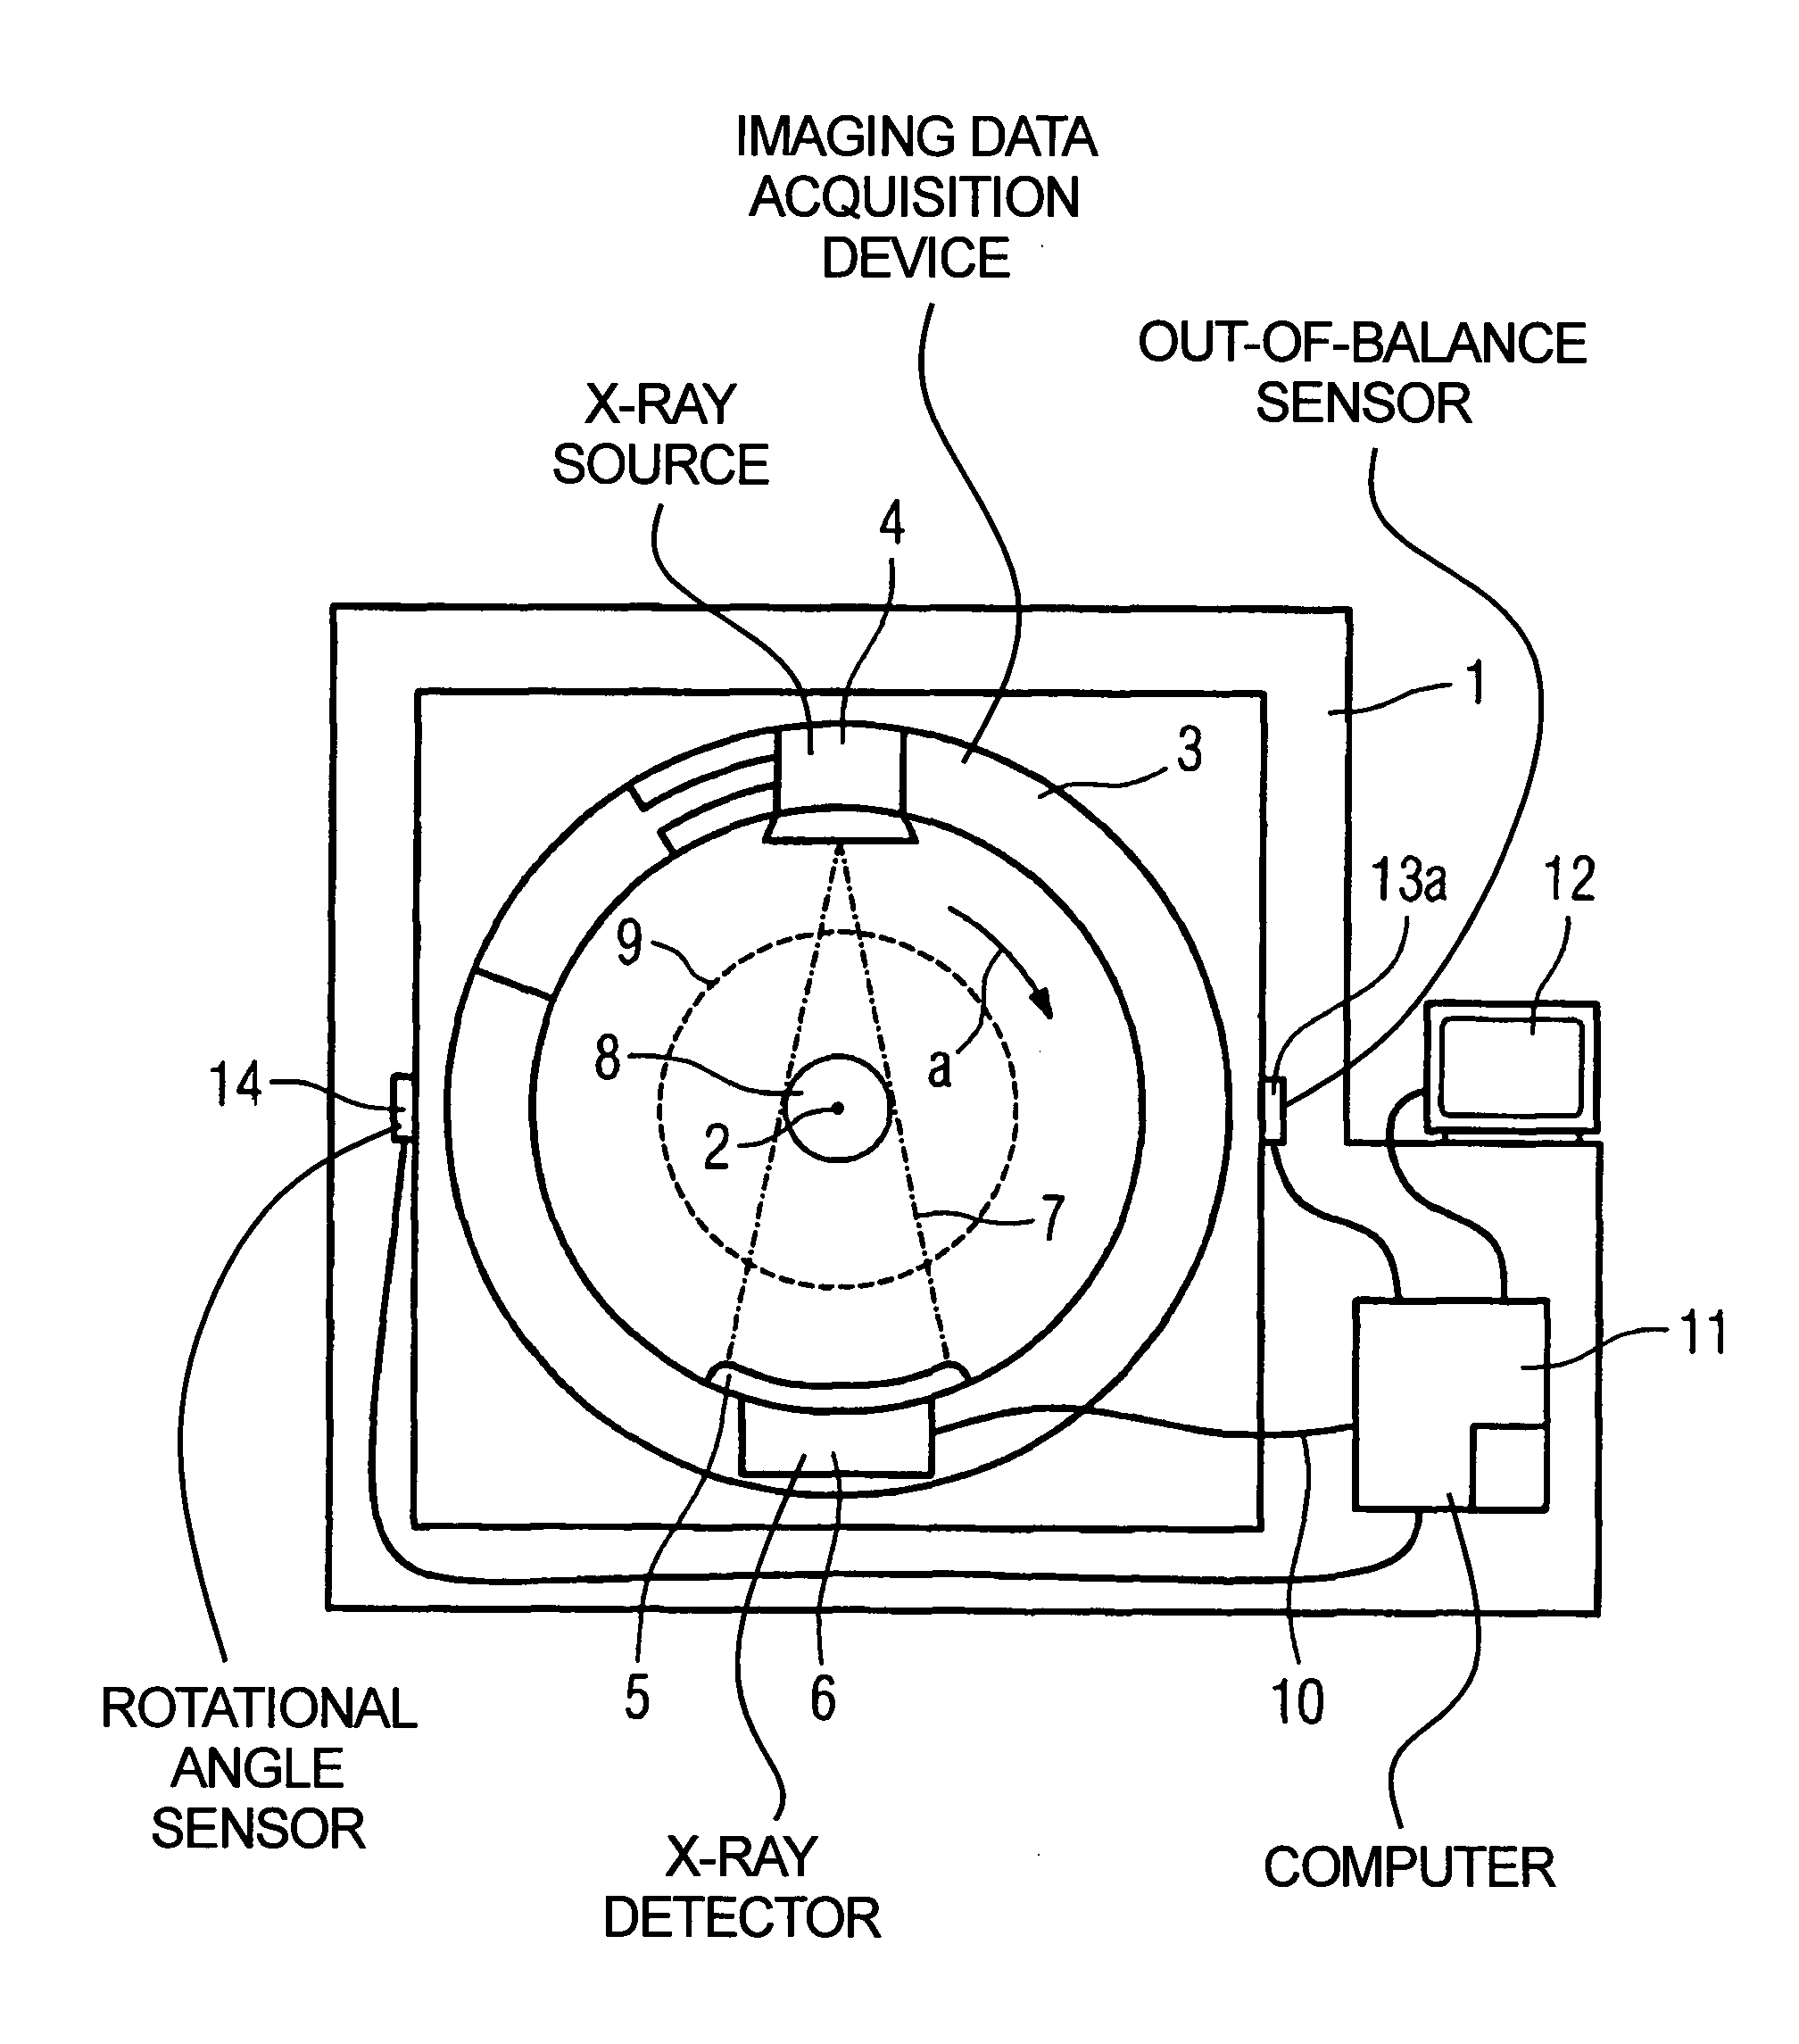 Method for compensating and out-of-balance condition of a rotating body